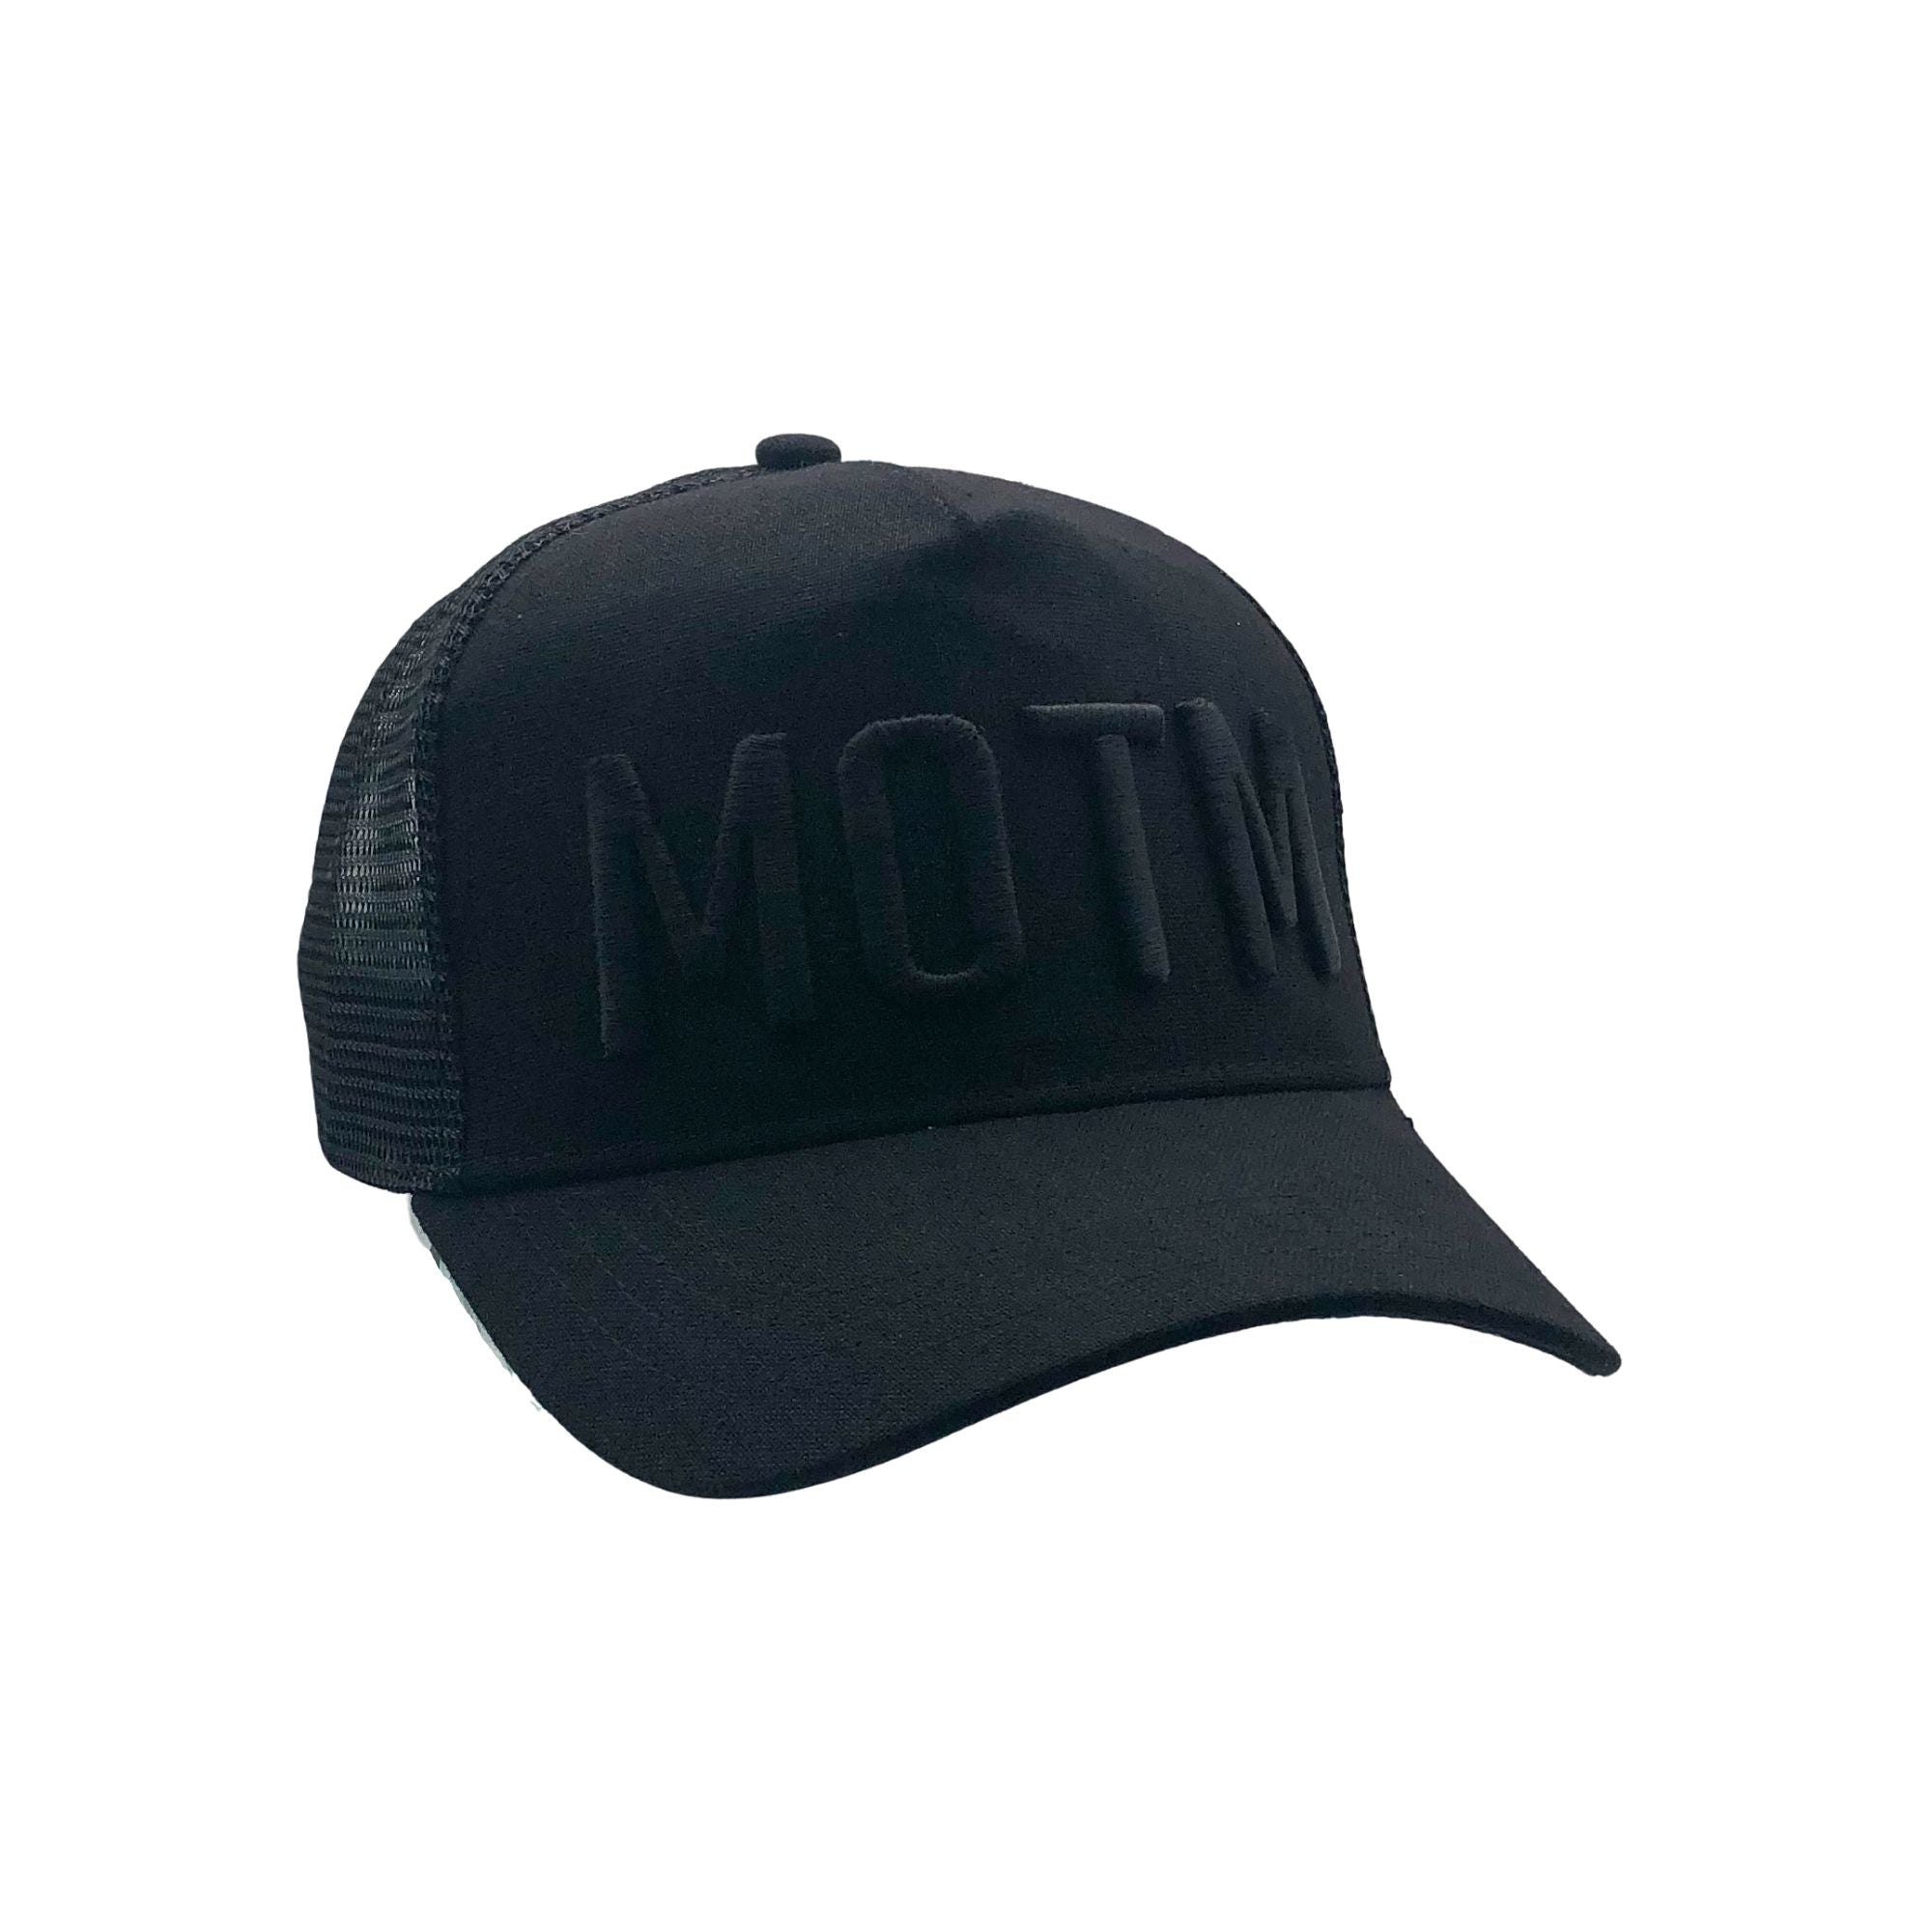 THE Cap MAN Bl OF MATCH® MOTM Embroidered Roberto Carlos Official - 3D